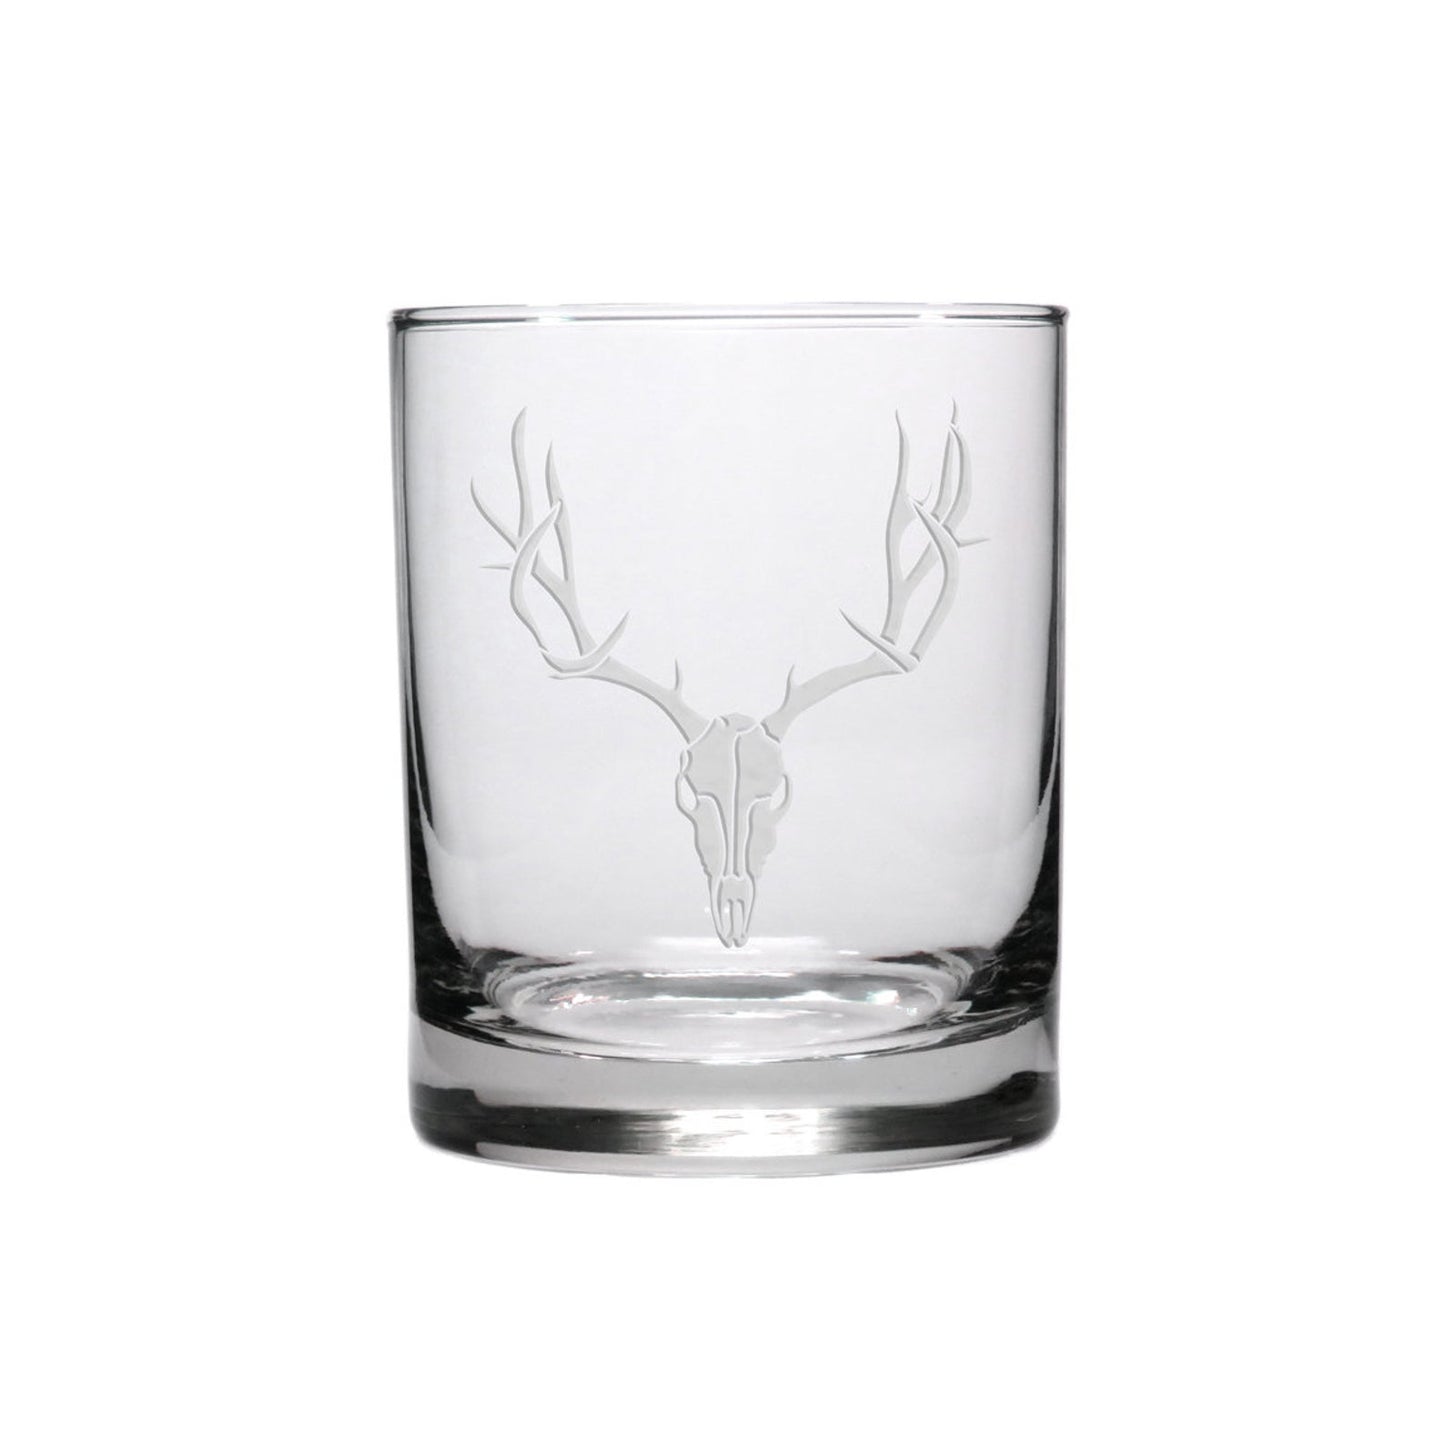 Etched Whisky Glasses